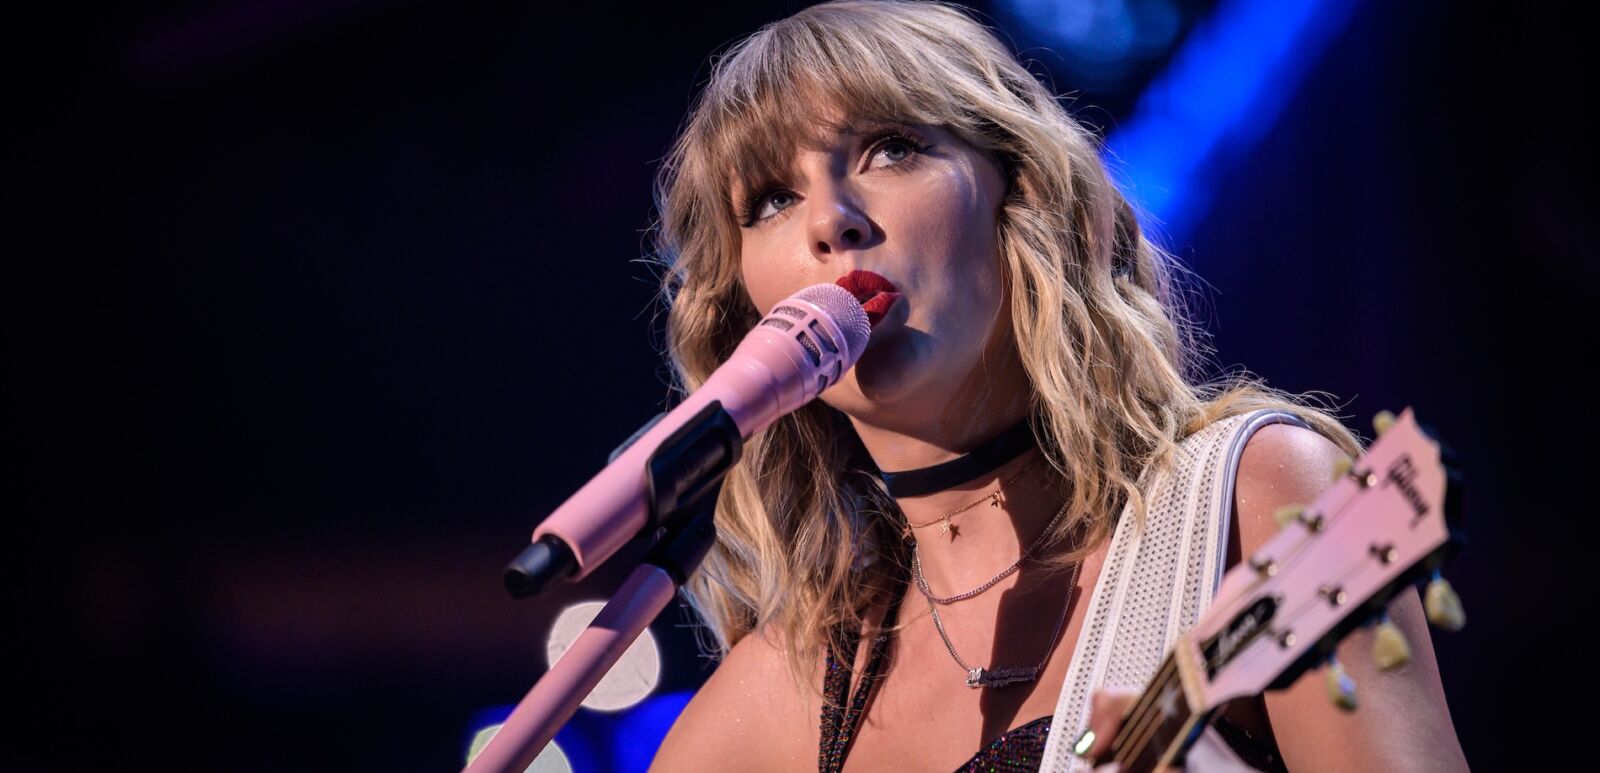 Taylor Swift performs at the 2019 Z100 Jingle Ball at Madison Square Garden. Photo by Shutterstock.